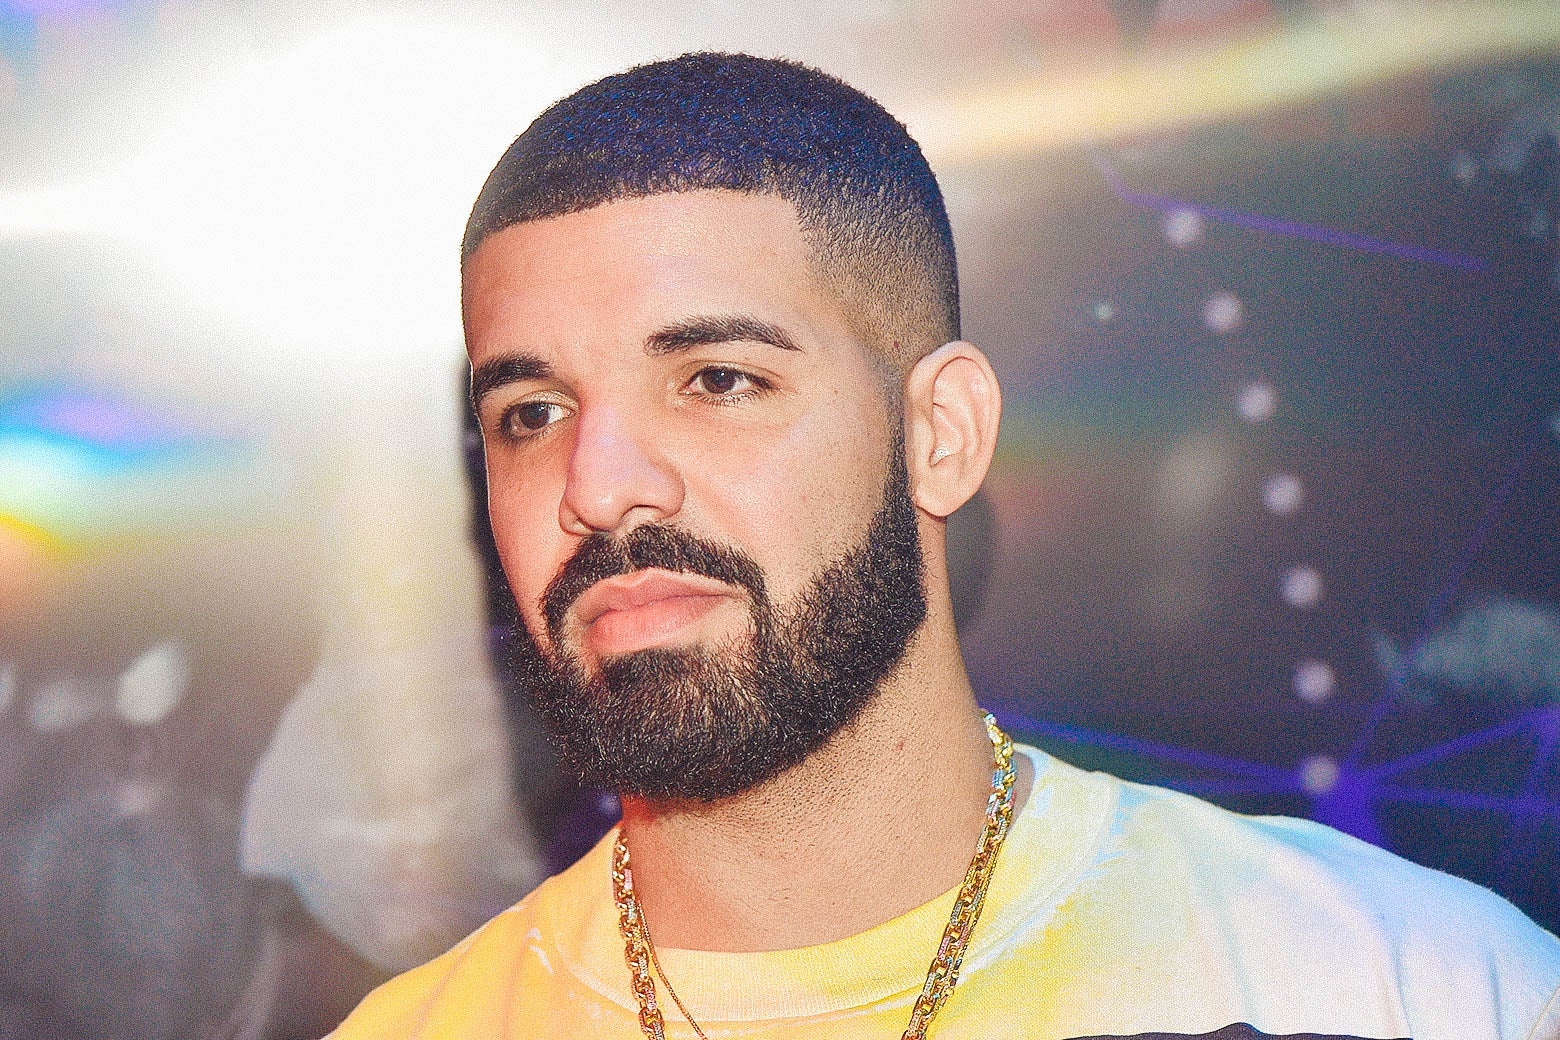 Drake gets roasted over his new hairstyle and a meme compares his hair to  NeNe Leakes, and the style she used to rock #RHOA [PHOTO] %